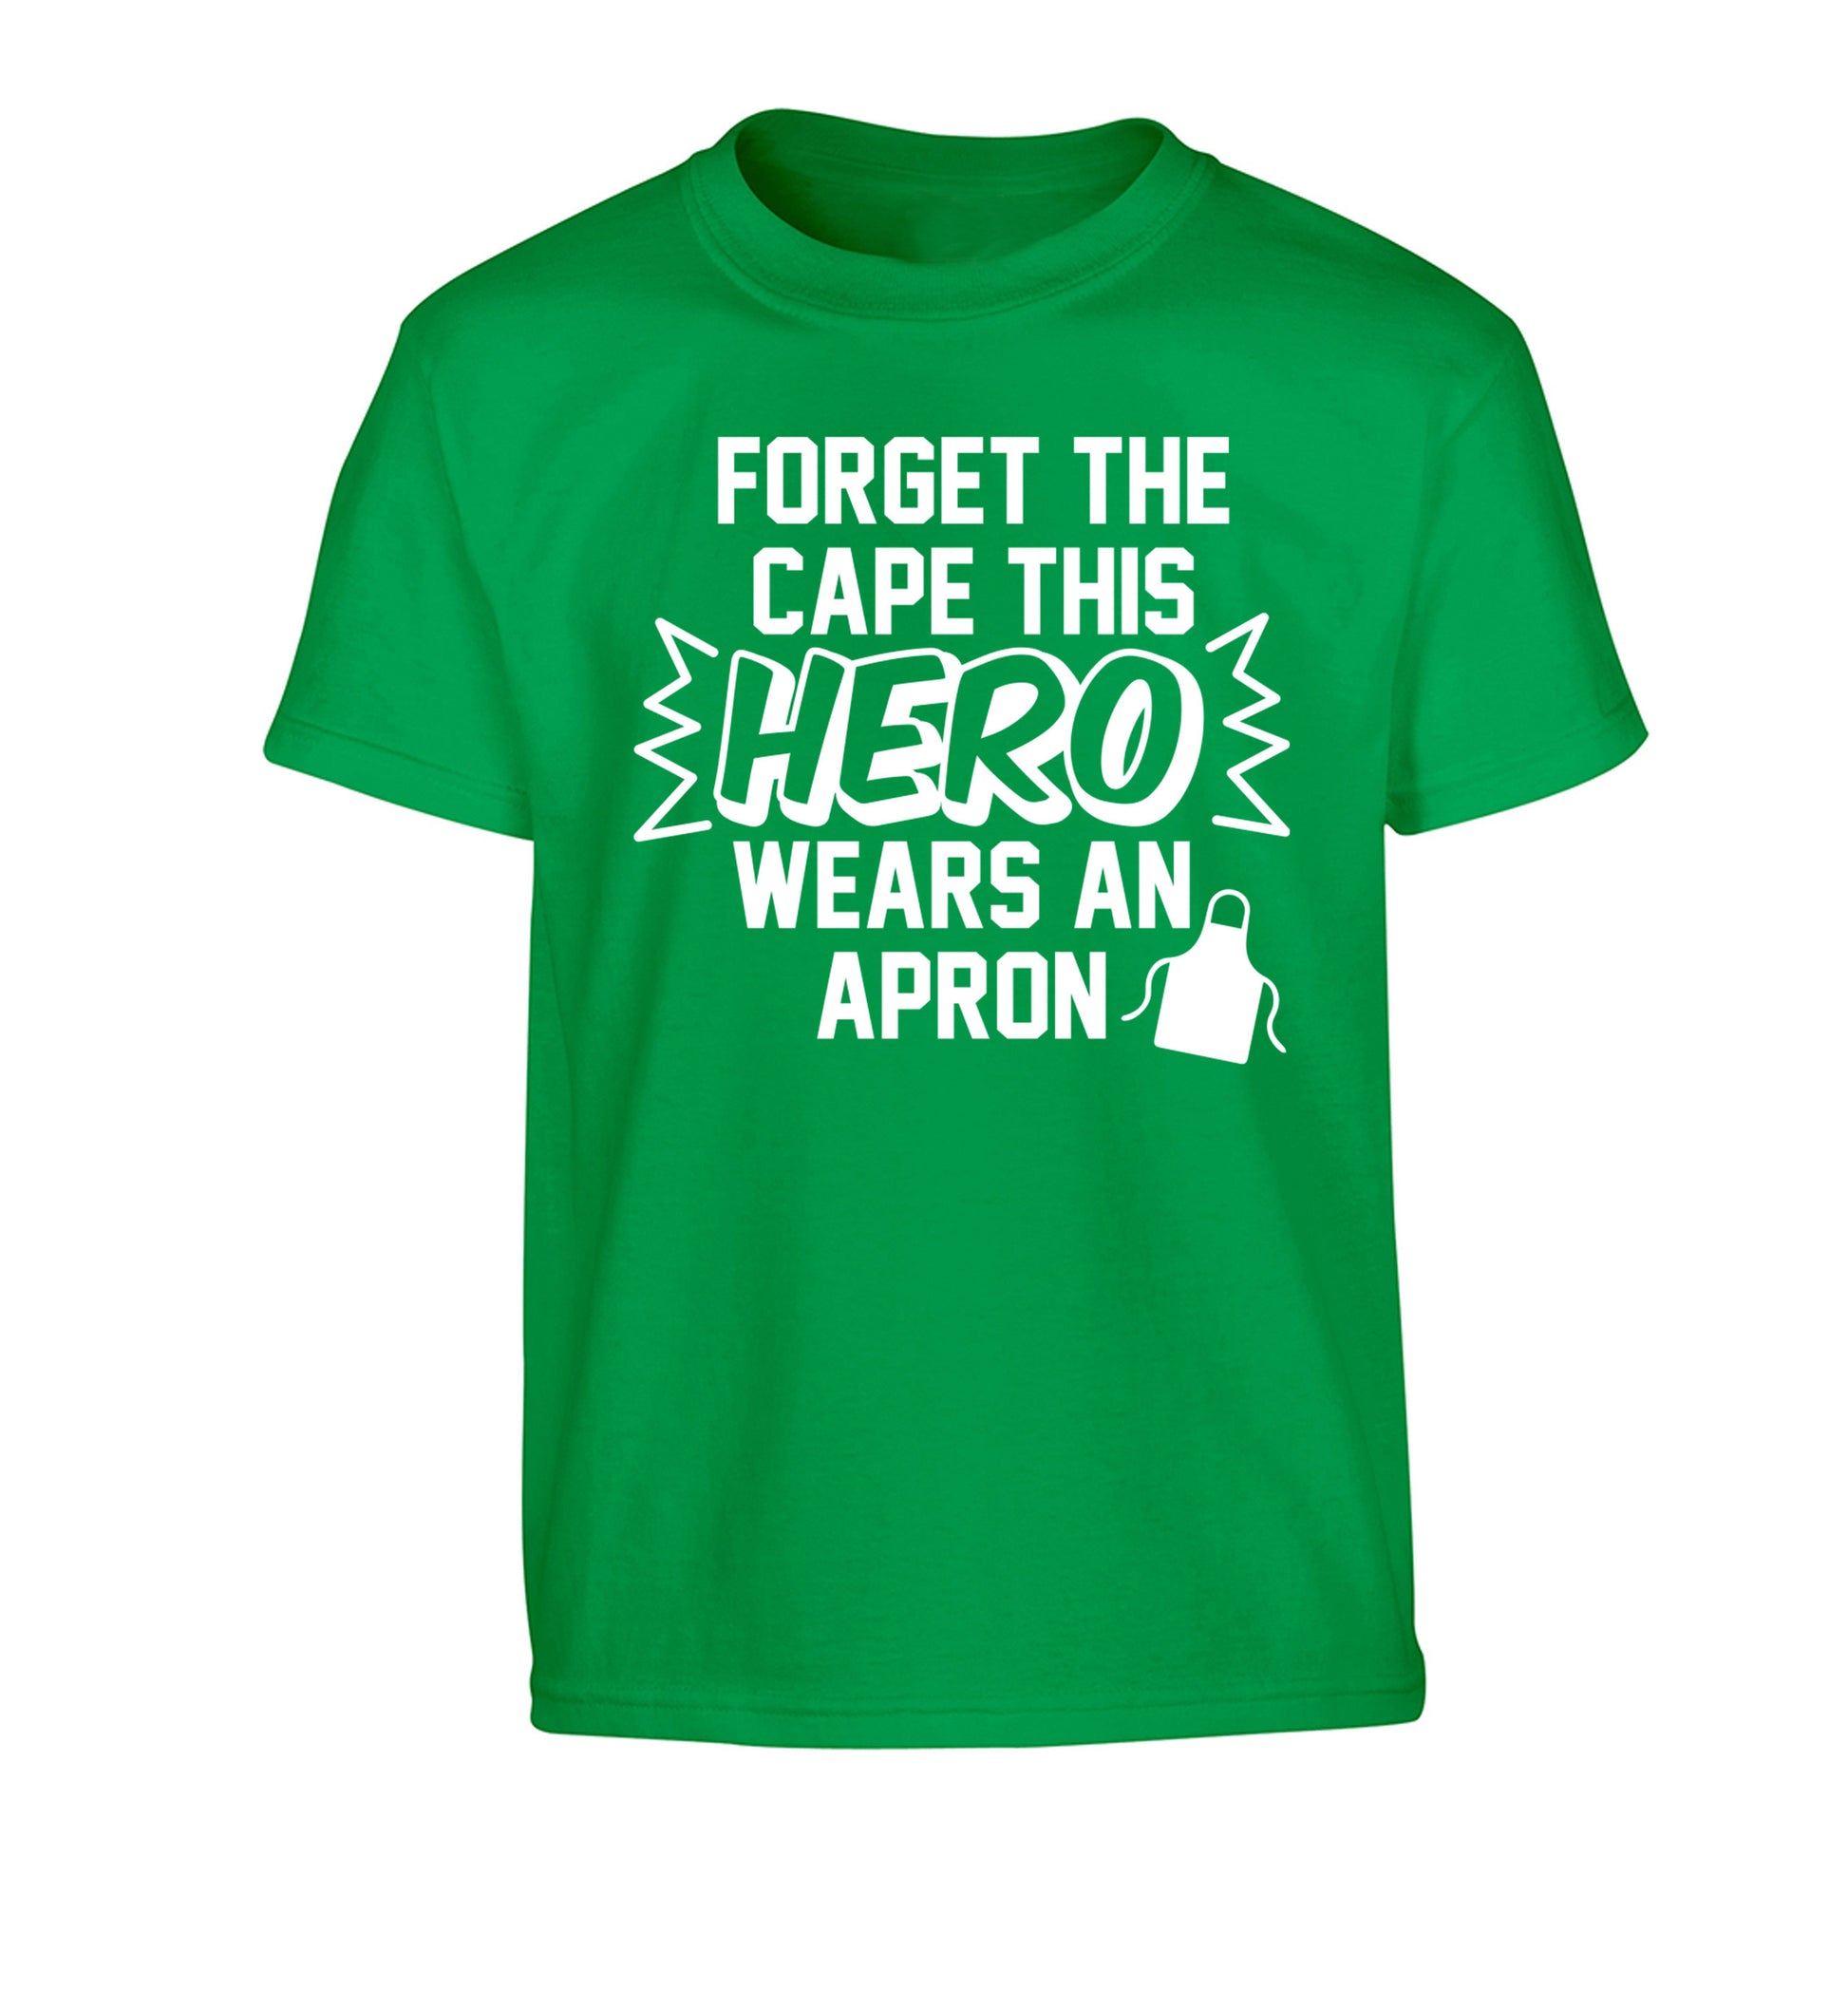 Forget the cape this hero wears an apron Children's green Tshirt 12-14 Years